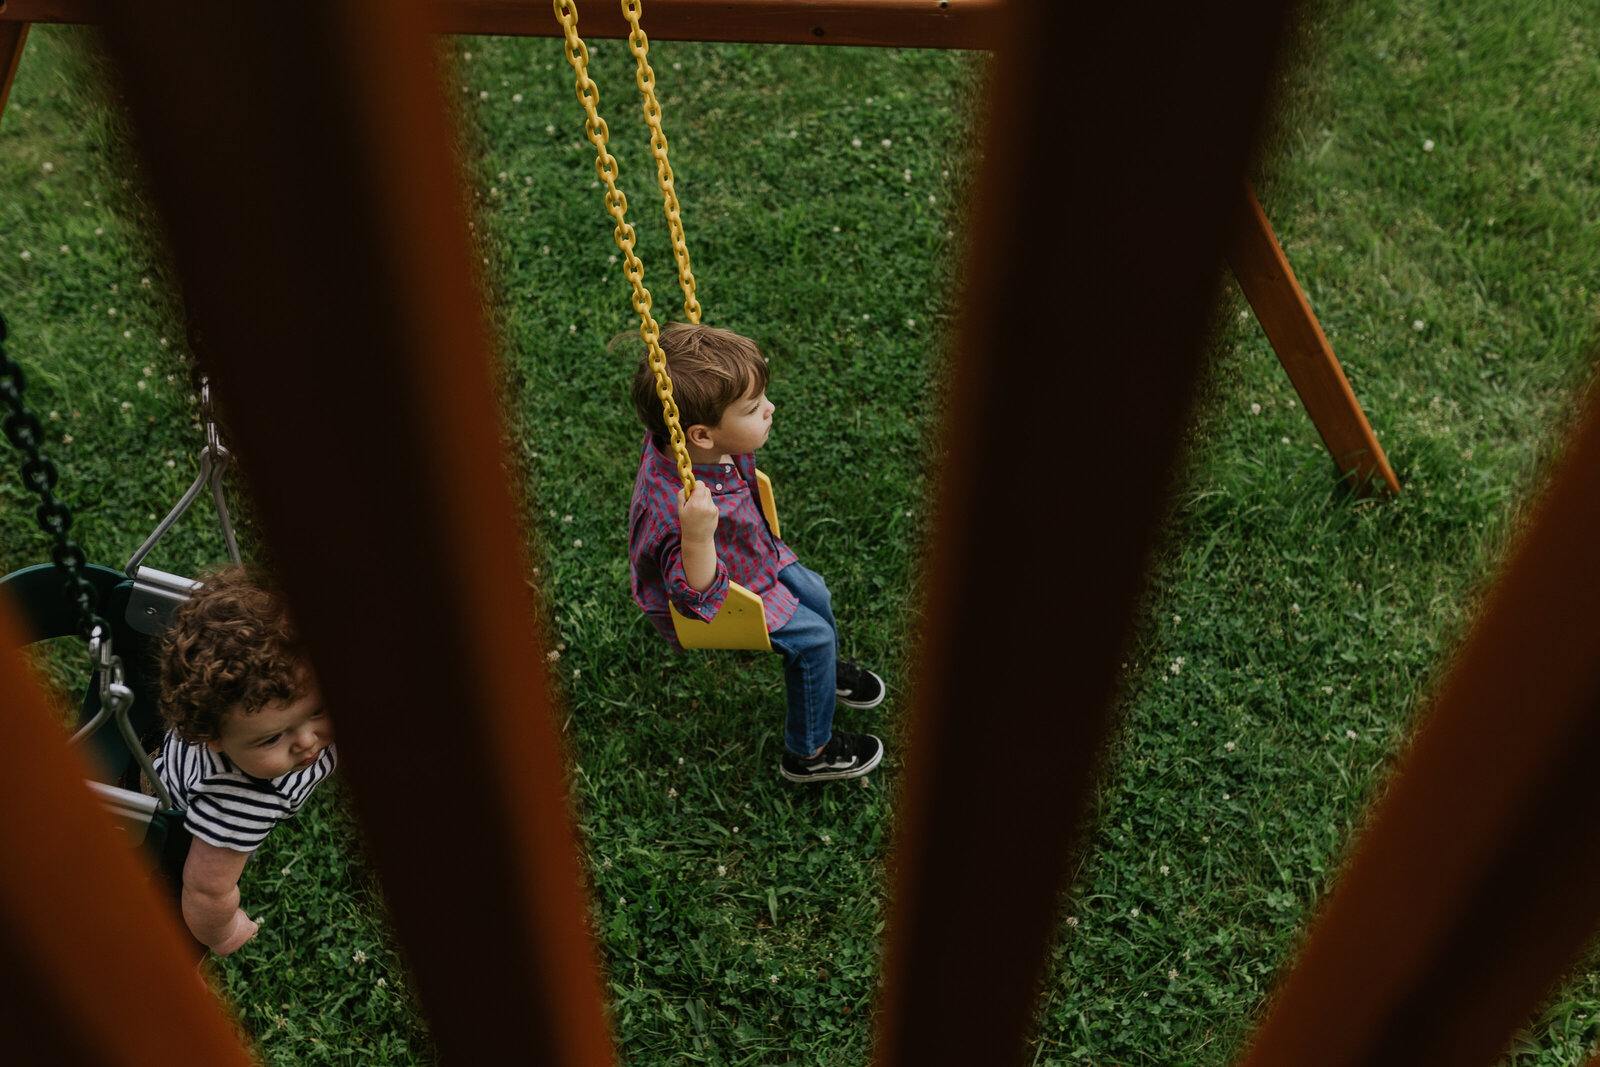 A baby and a young boy play on a swing set